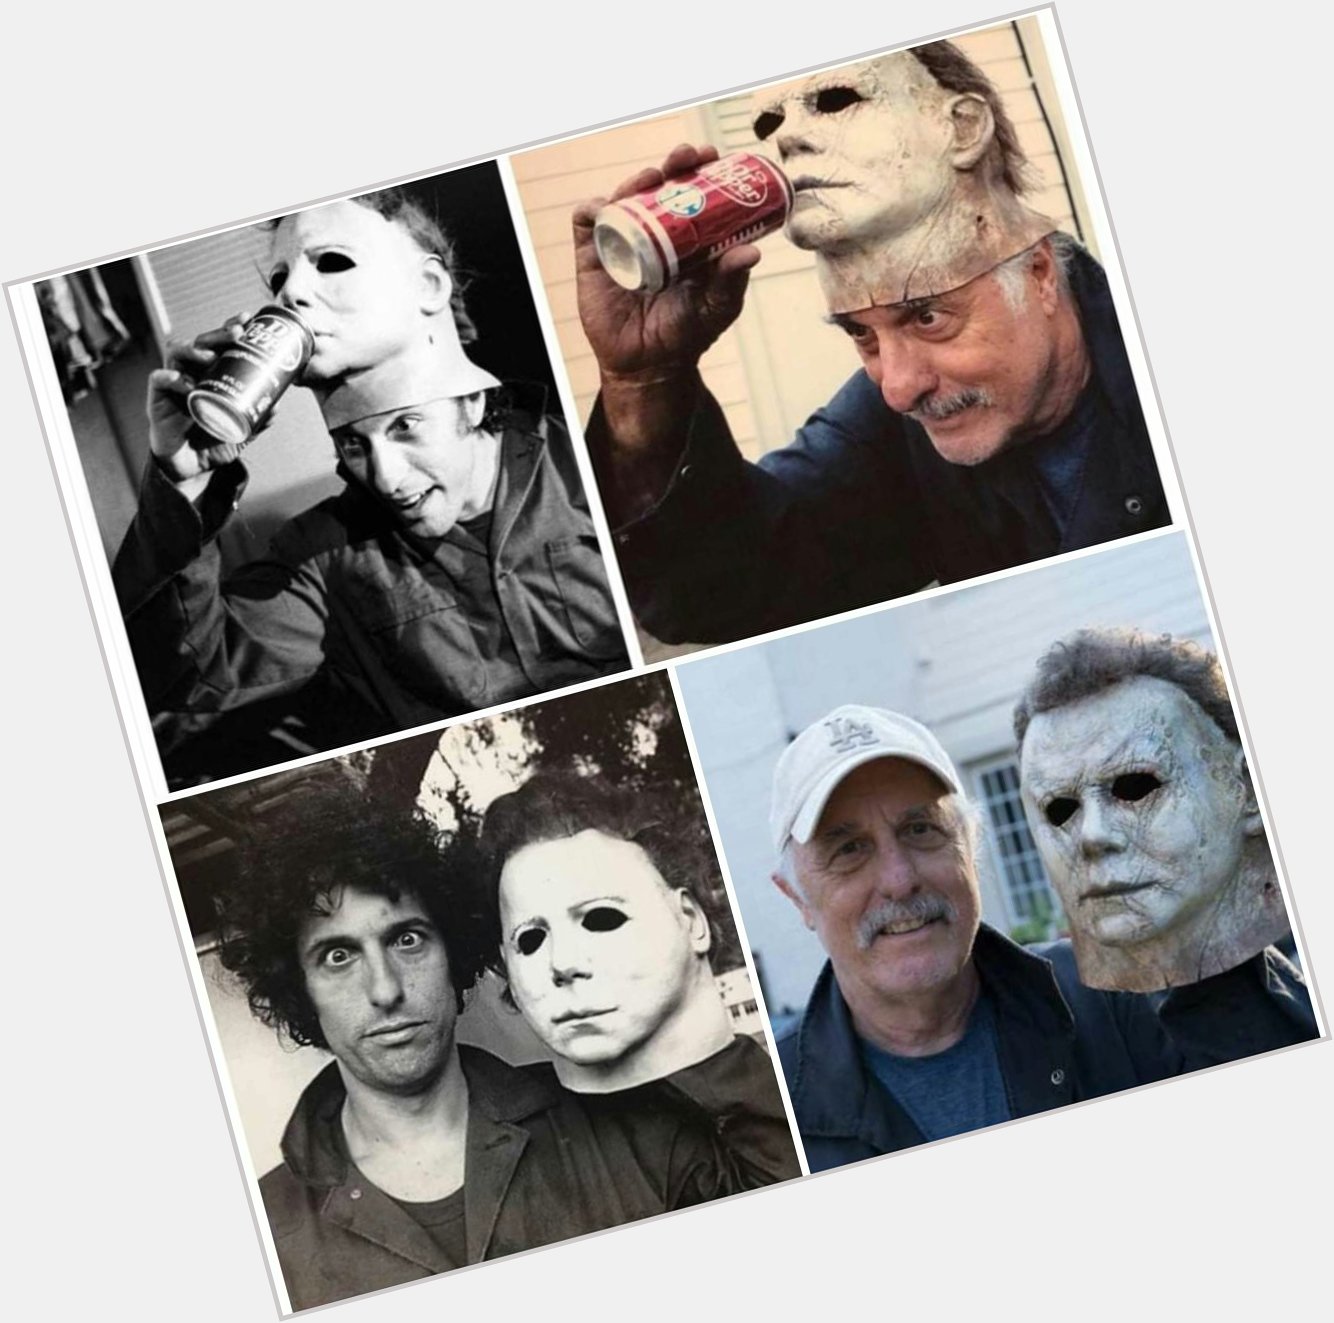 Happy birthday to the man behind the mask, Nick Castle.
Michael Myers 